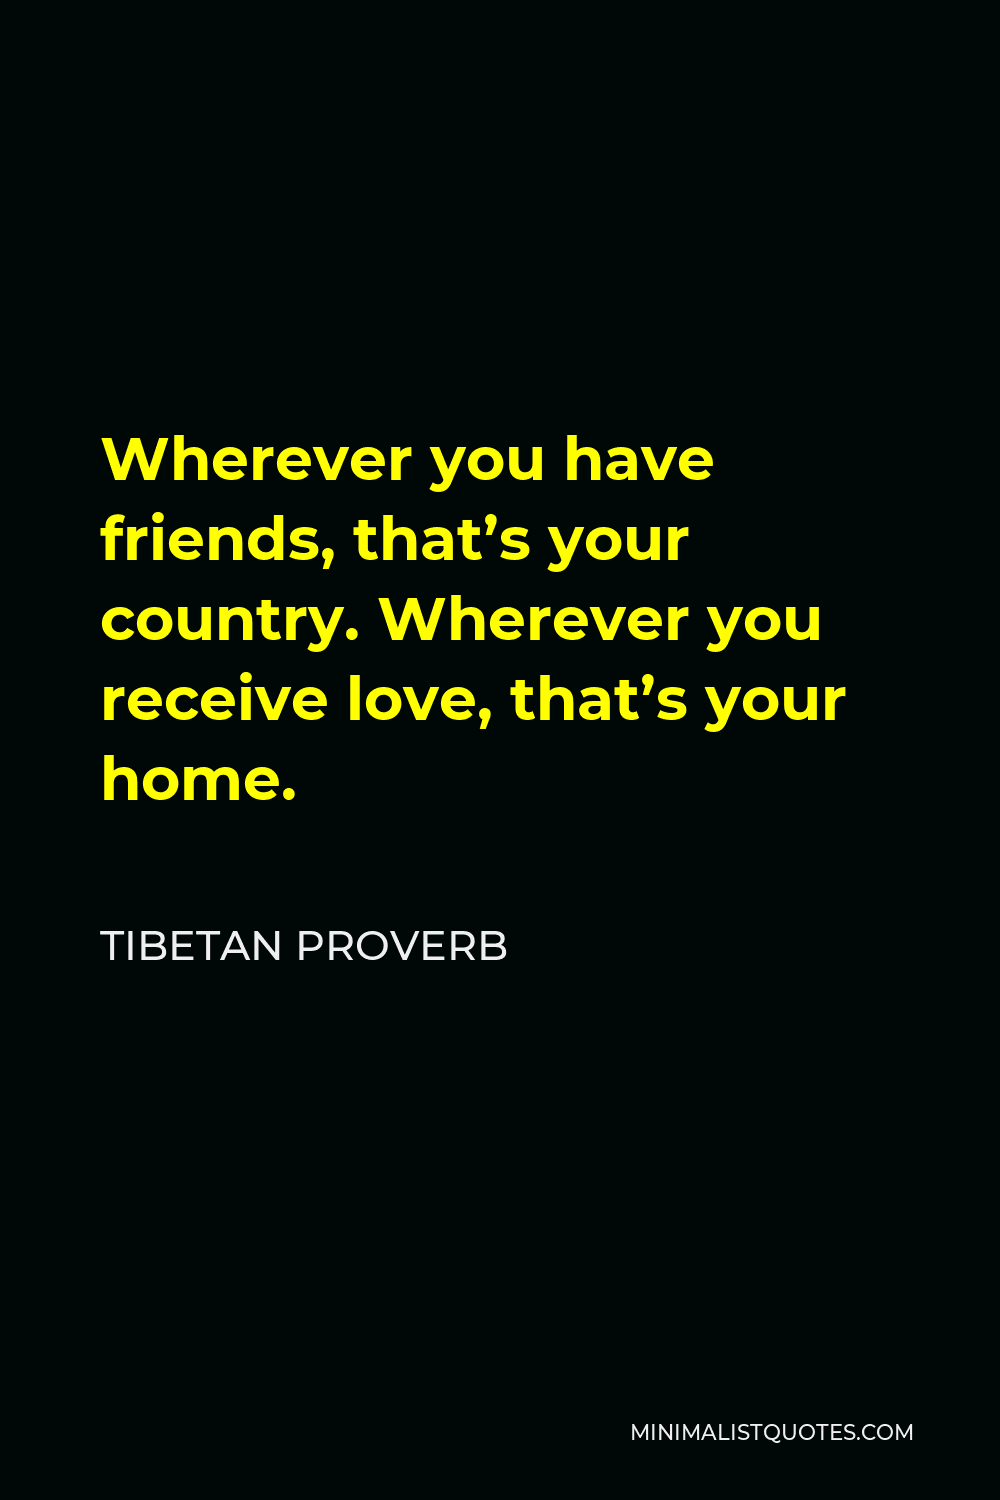 Tibetan Proverb Quote - Wherever you have friends, that’s your country. Wherever you receive love, that’s your home.